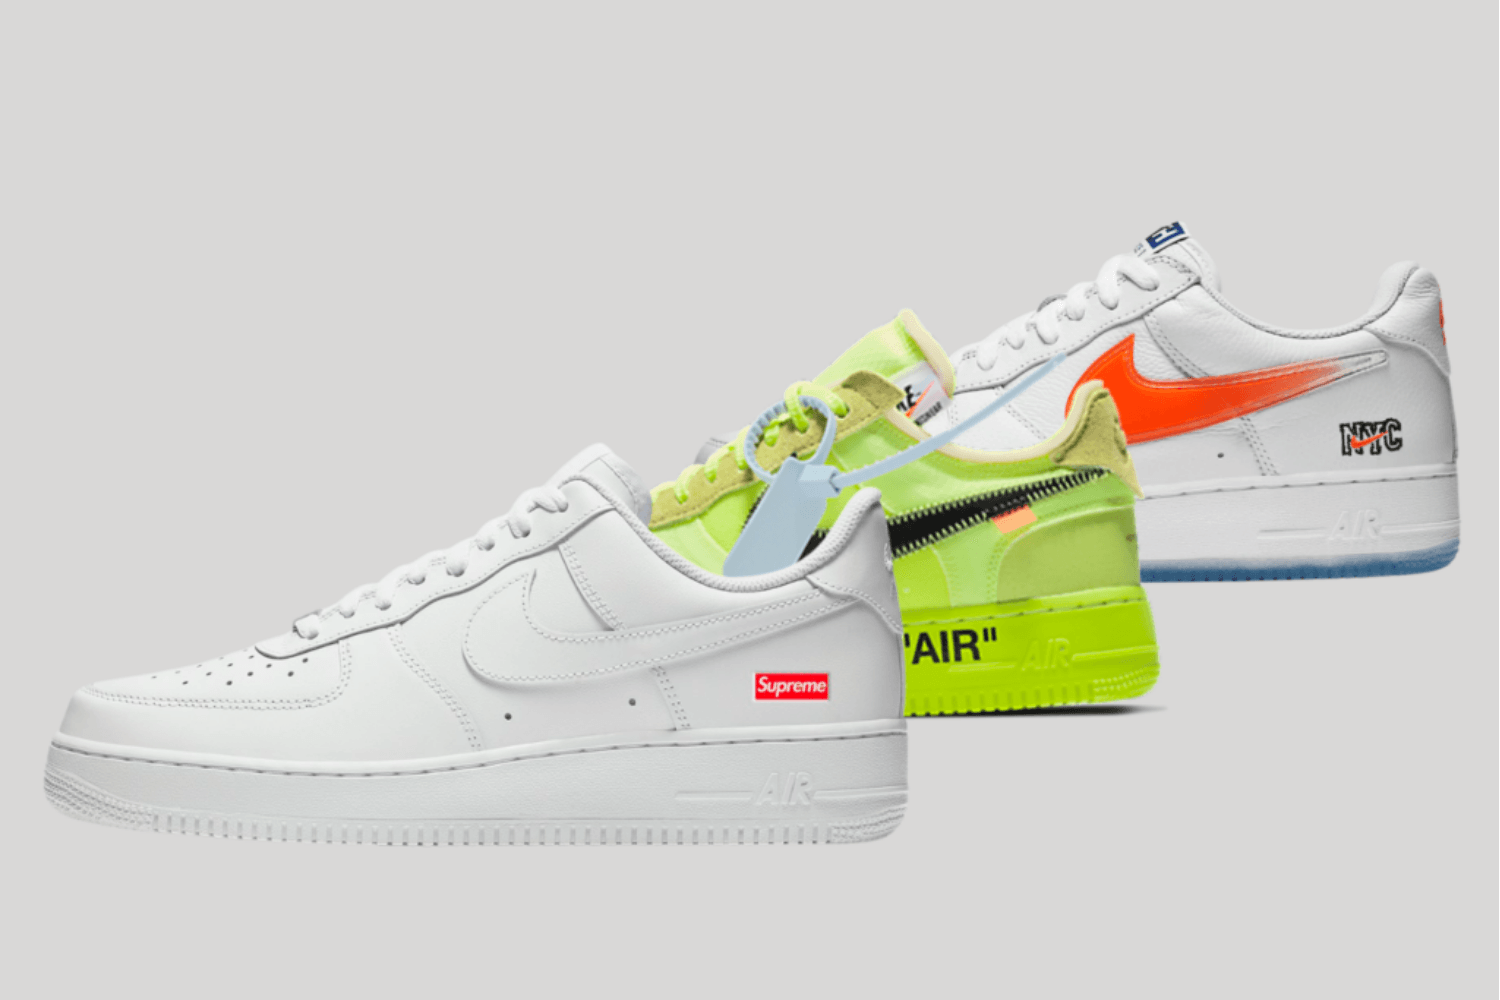 The best selling Nike Air Force 1s at StockX right now